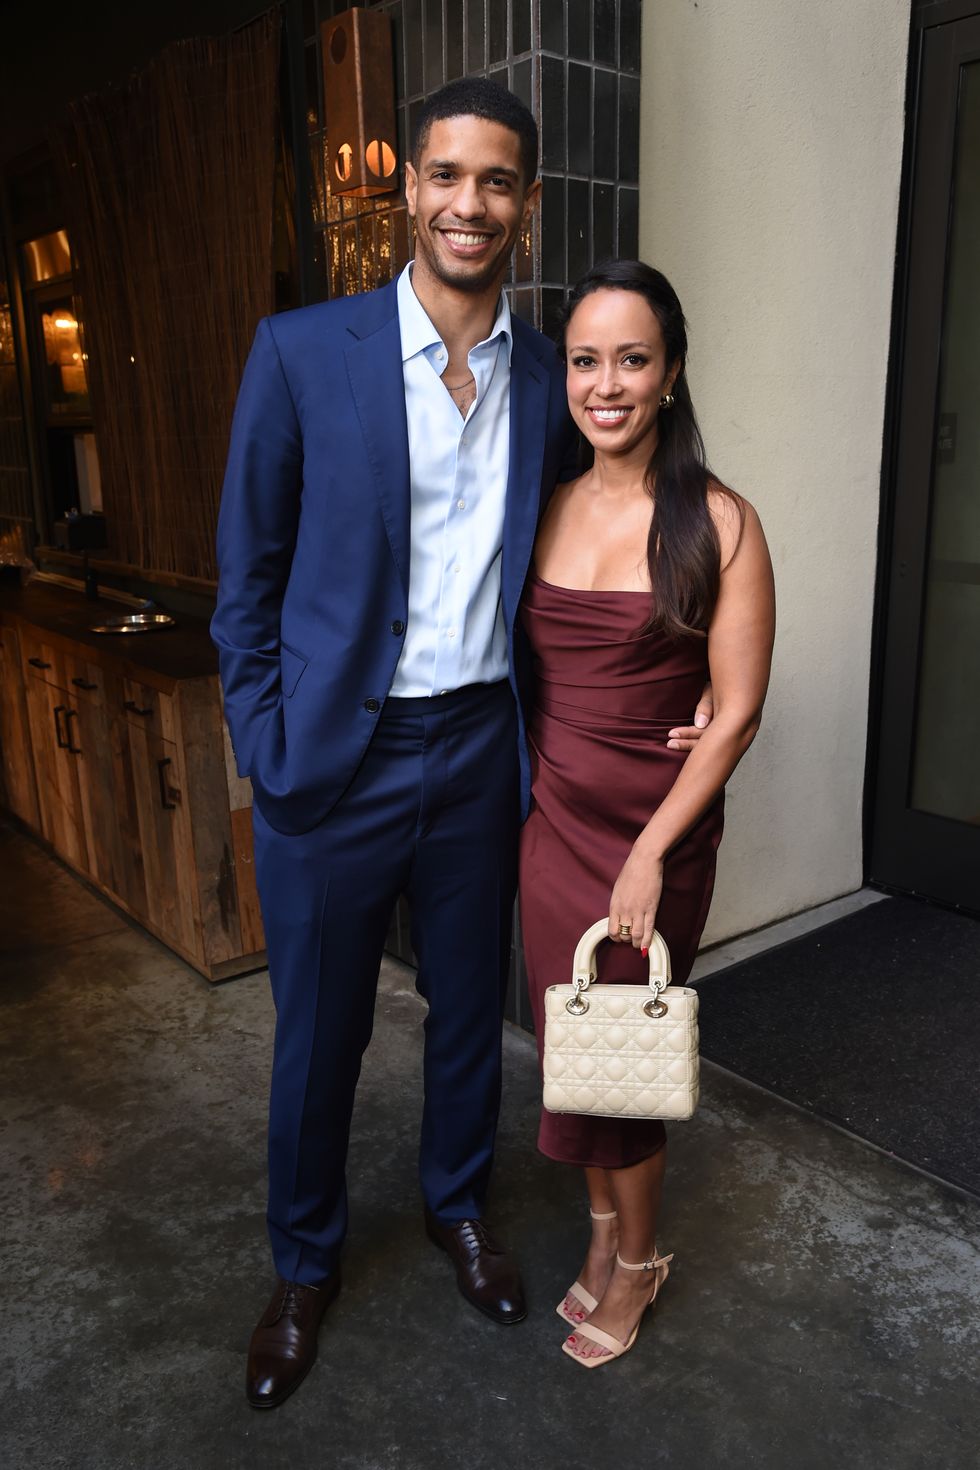 bachelor in paradise   press, influencers, bachelor nation talent and more gathered ahead of the two night season finale of "bachelor in paradise" at ka'teen in hollywood, california abcstewart cookromeo alexander, kira mengistu